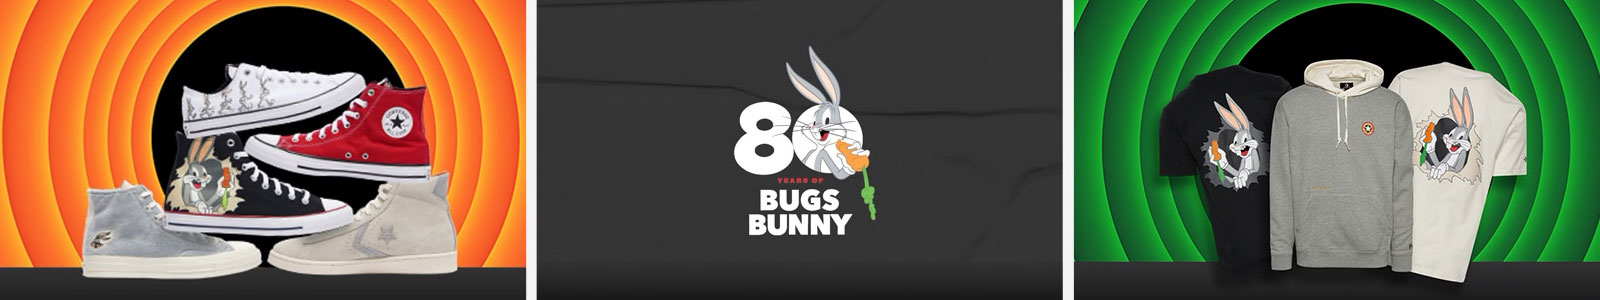 Converse Bugs Bunny 80th Shoes and Apparel 